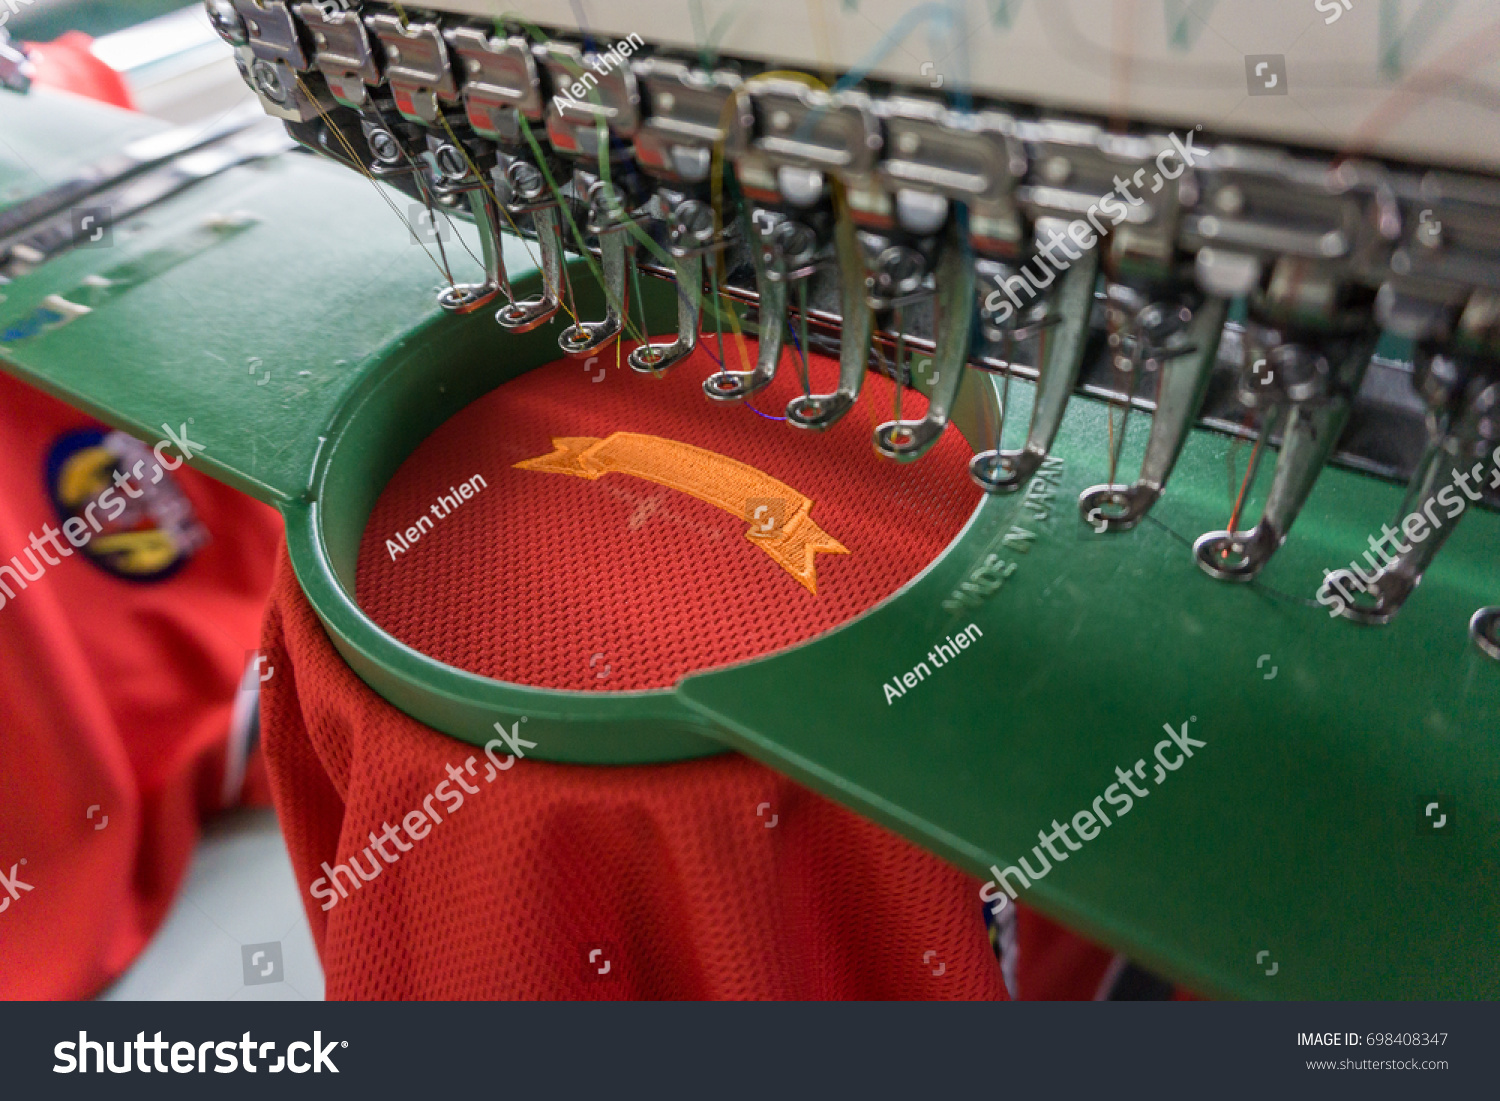 Embroidery machine needle in Textile Industry at Garment Manufacturers, Embroidery t-shirt in progress , Embroidery needle, Needle with thread (selective focus and soft focus) #698408347